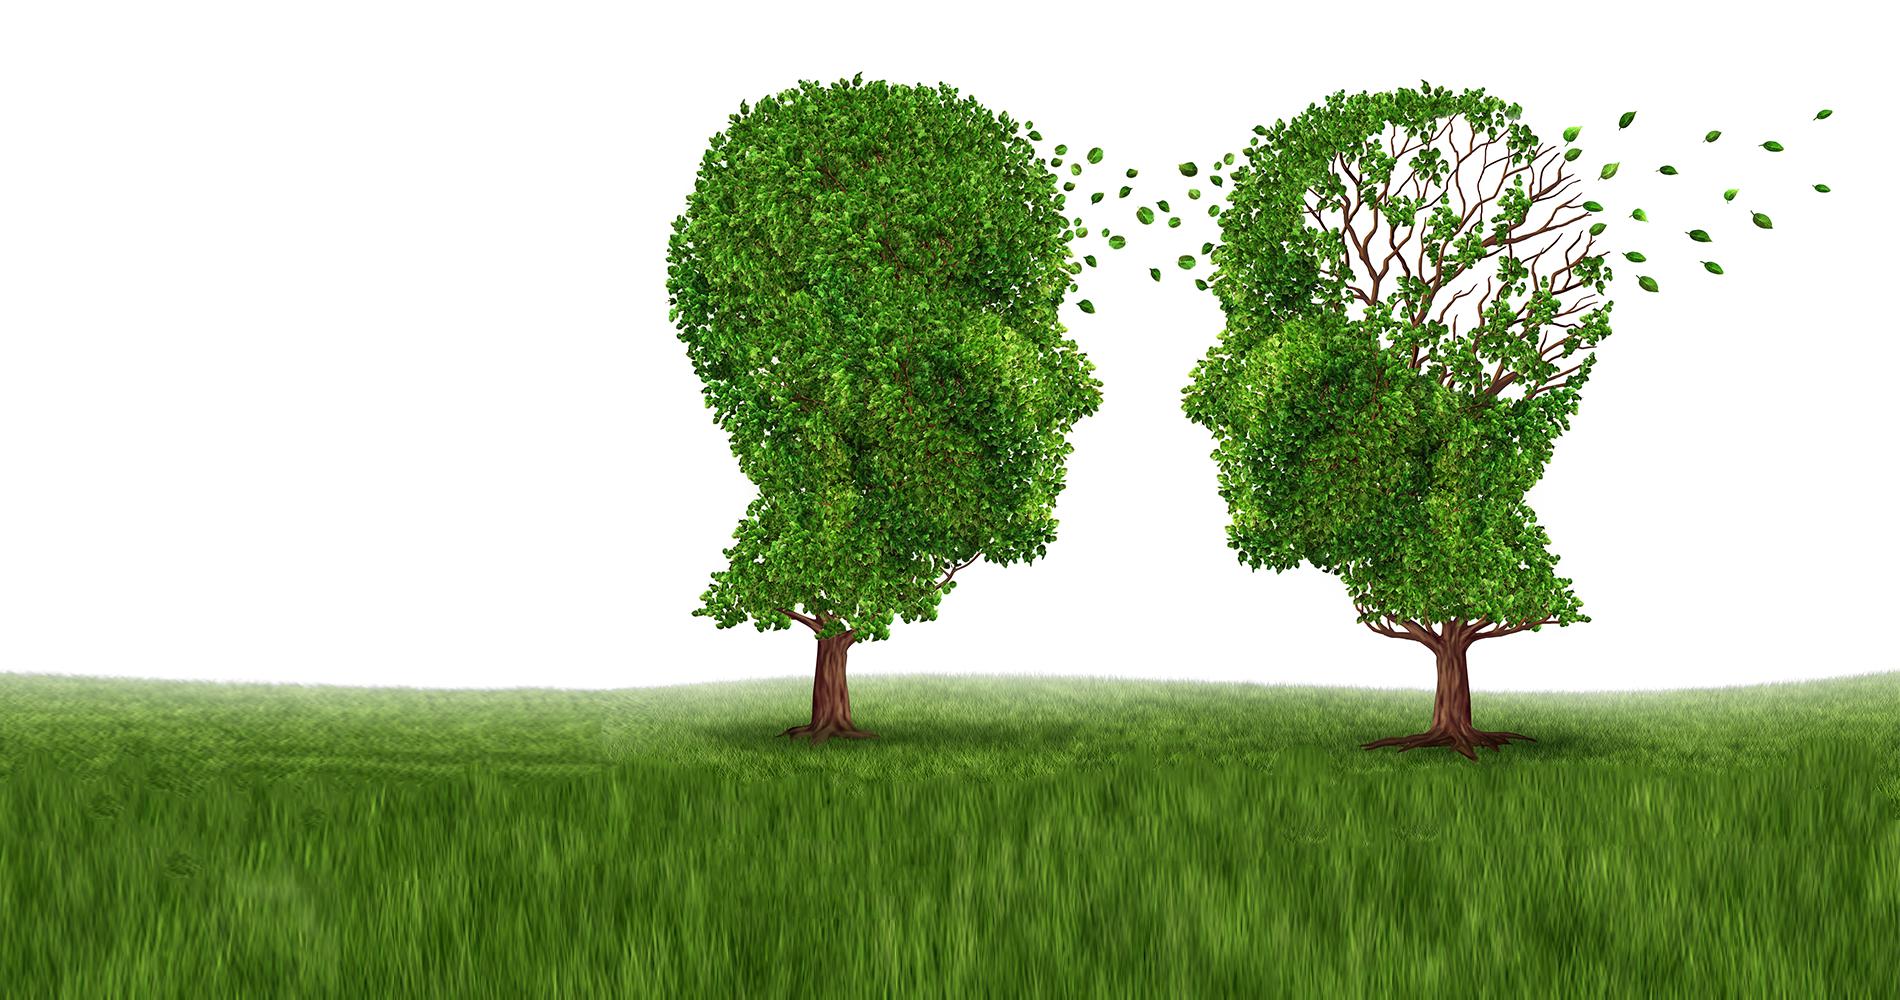 How To Recognize Alzheimer’s Disease When It Strikes a Loved One